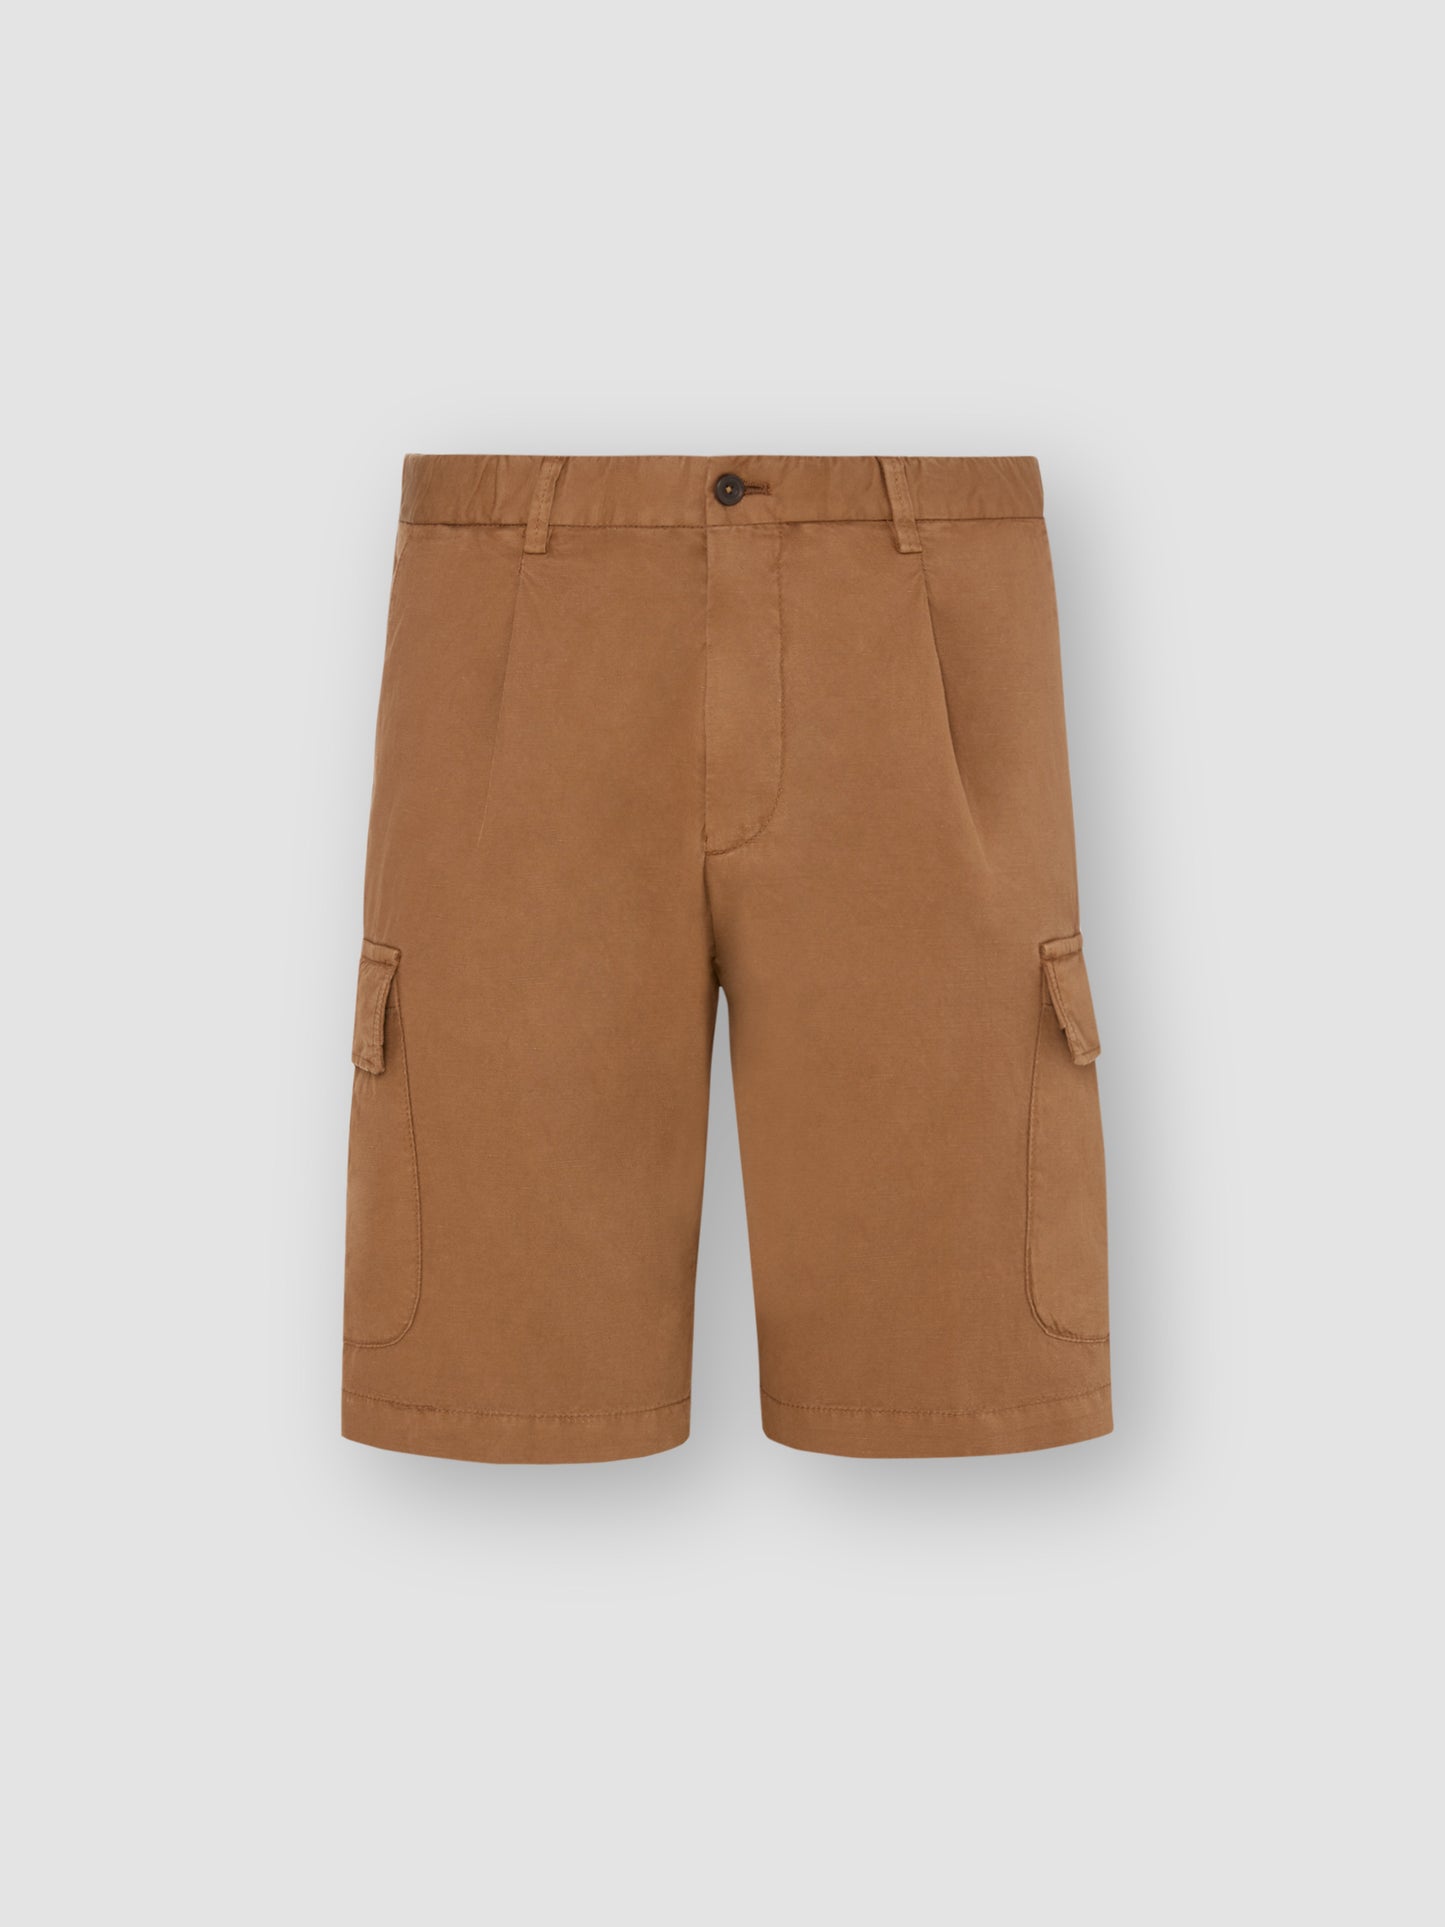 Cotton Drill Pleated Cargo Shorts Tobacco Product Image